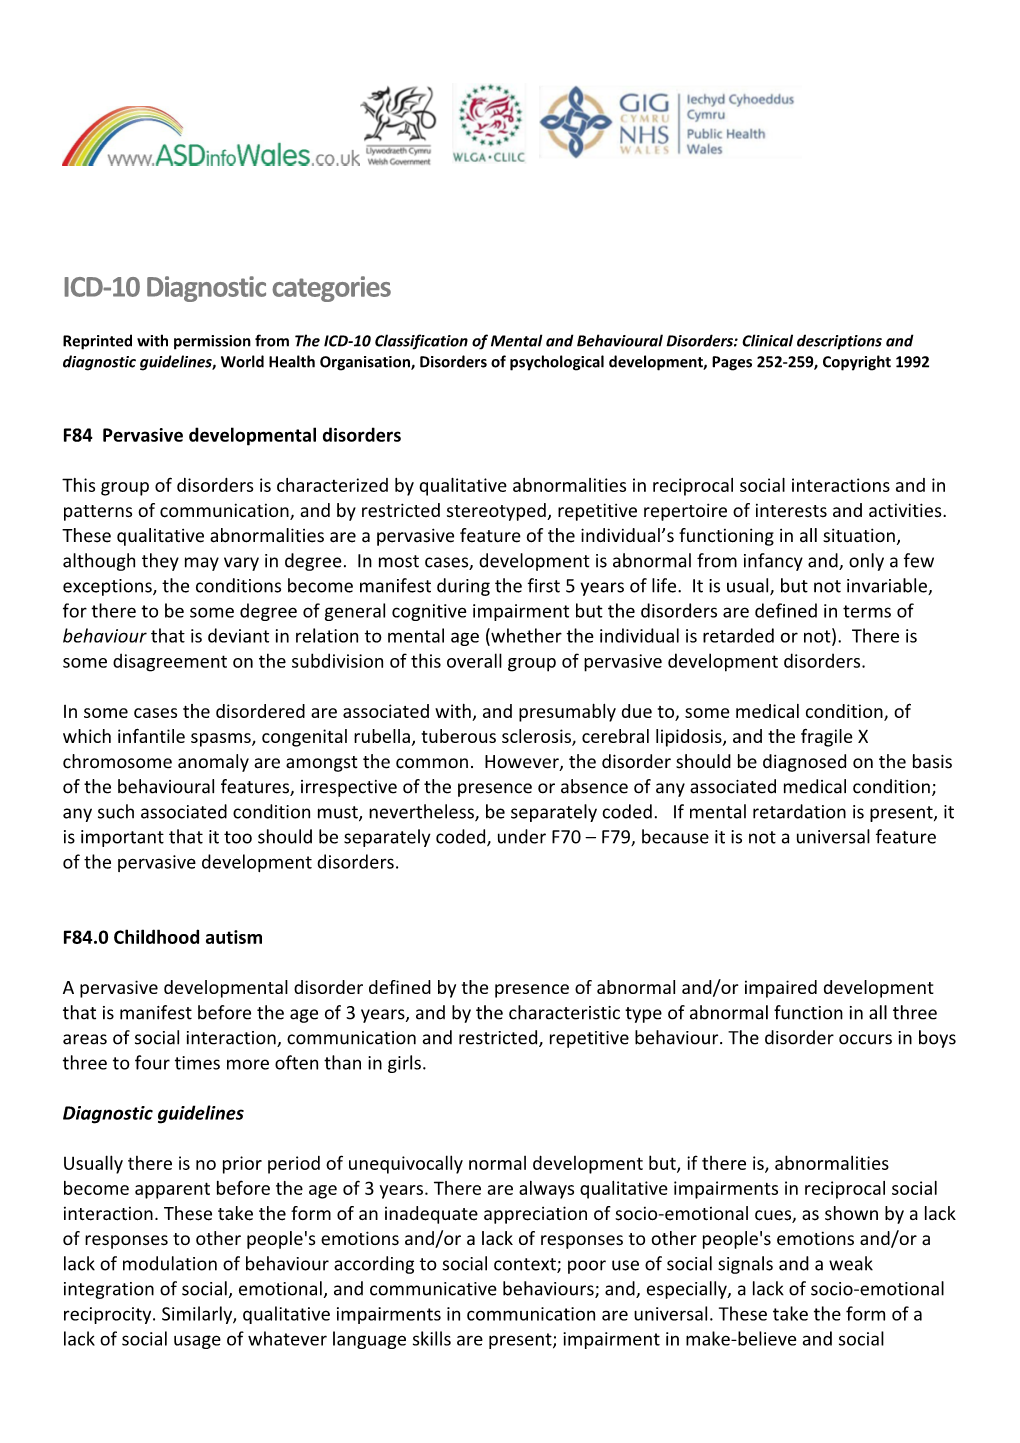 ICD-10 Diagnostic Categories